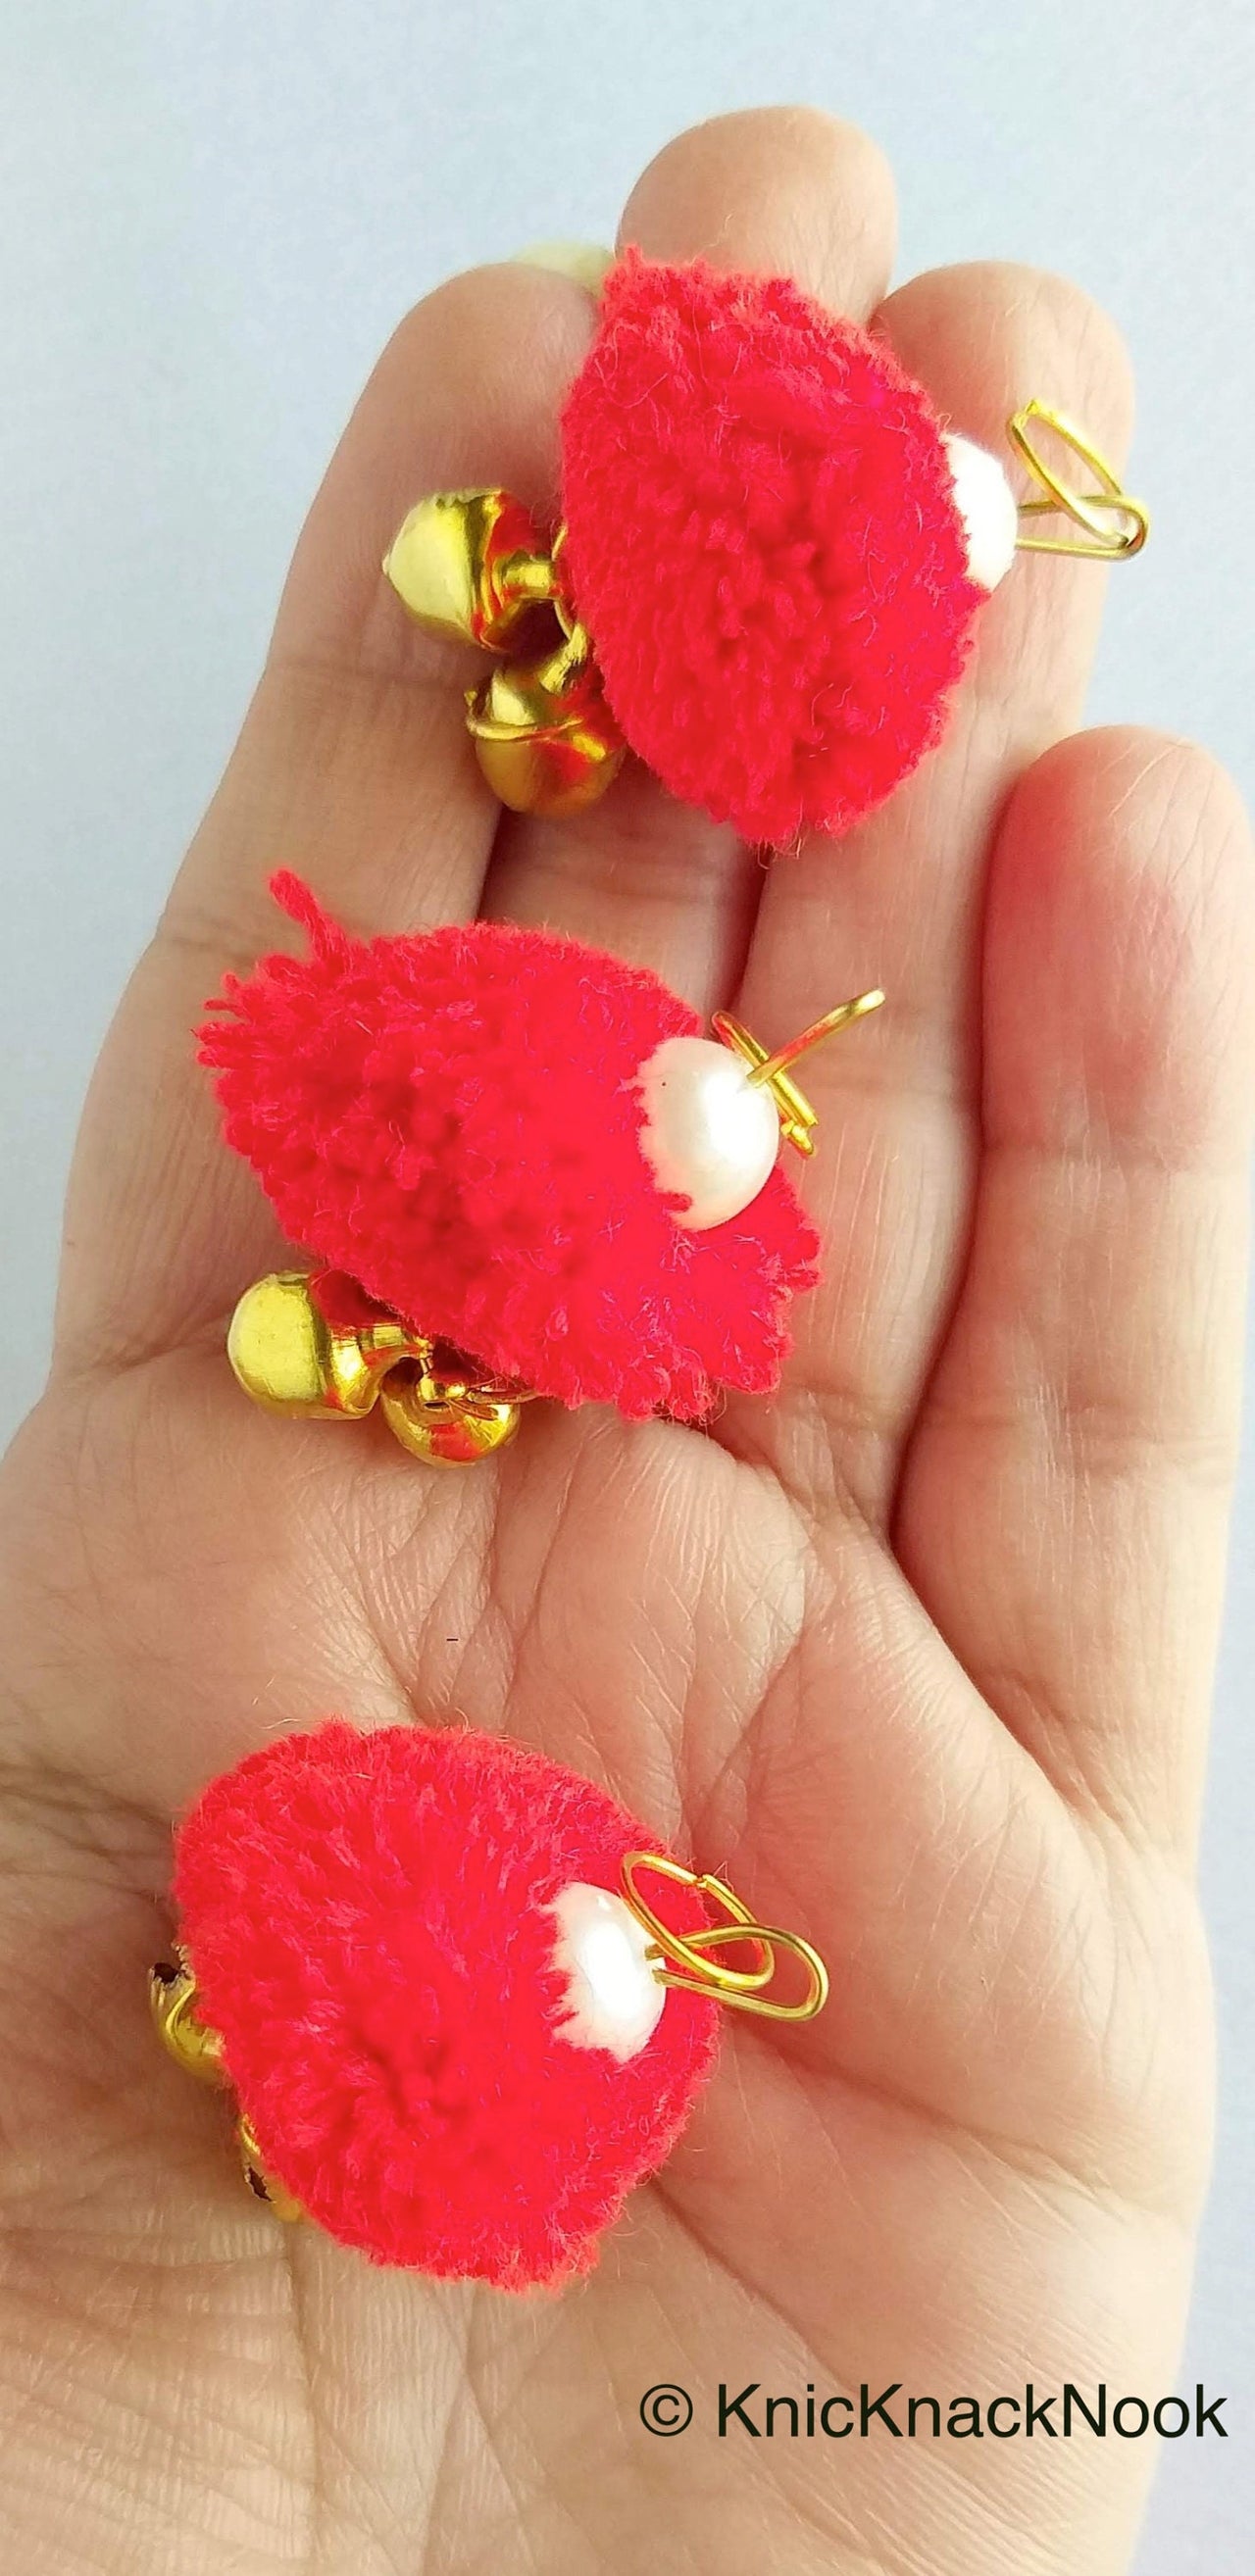 6 x Red Pom-Pom Tassel Latkan With Pearl Beads And Jingle Bell Beads, Pompom Decorations, Approx. 30mm - 210119L208